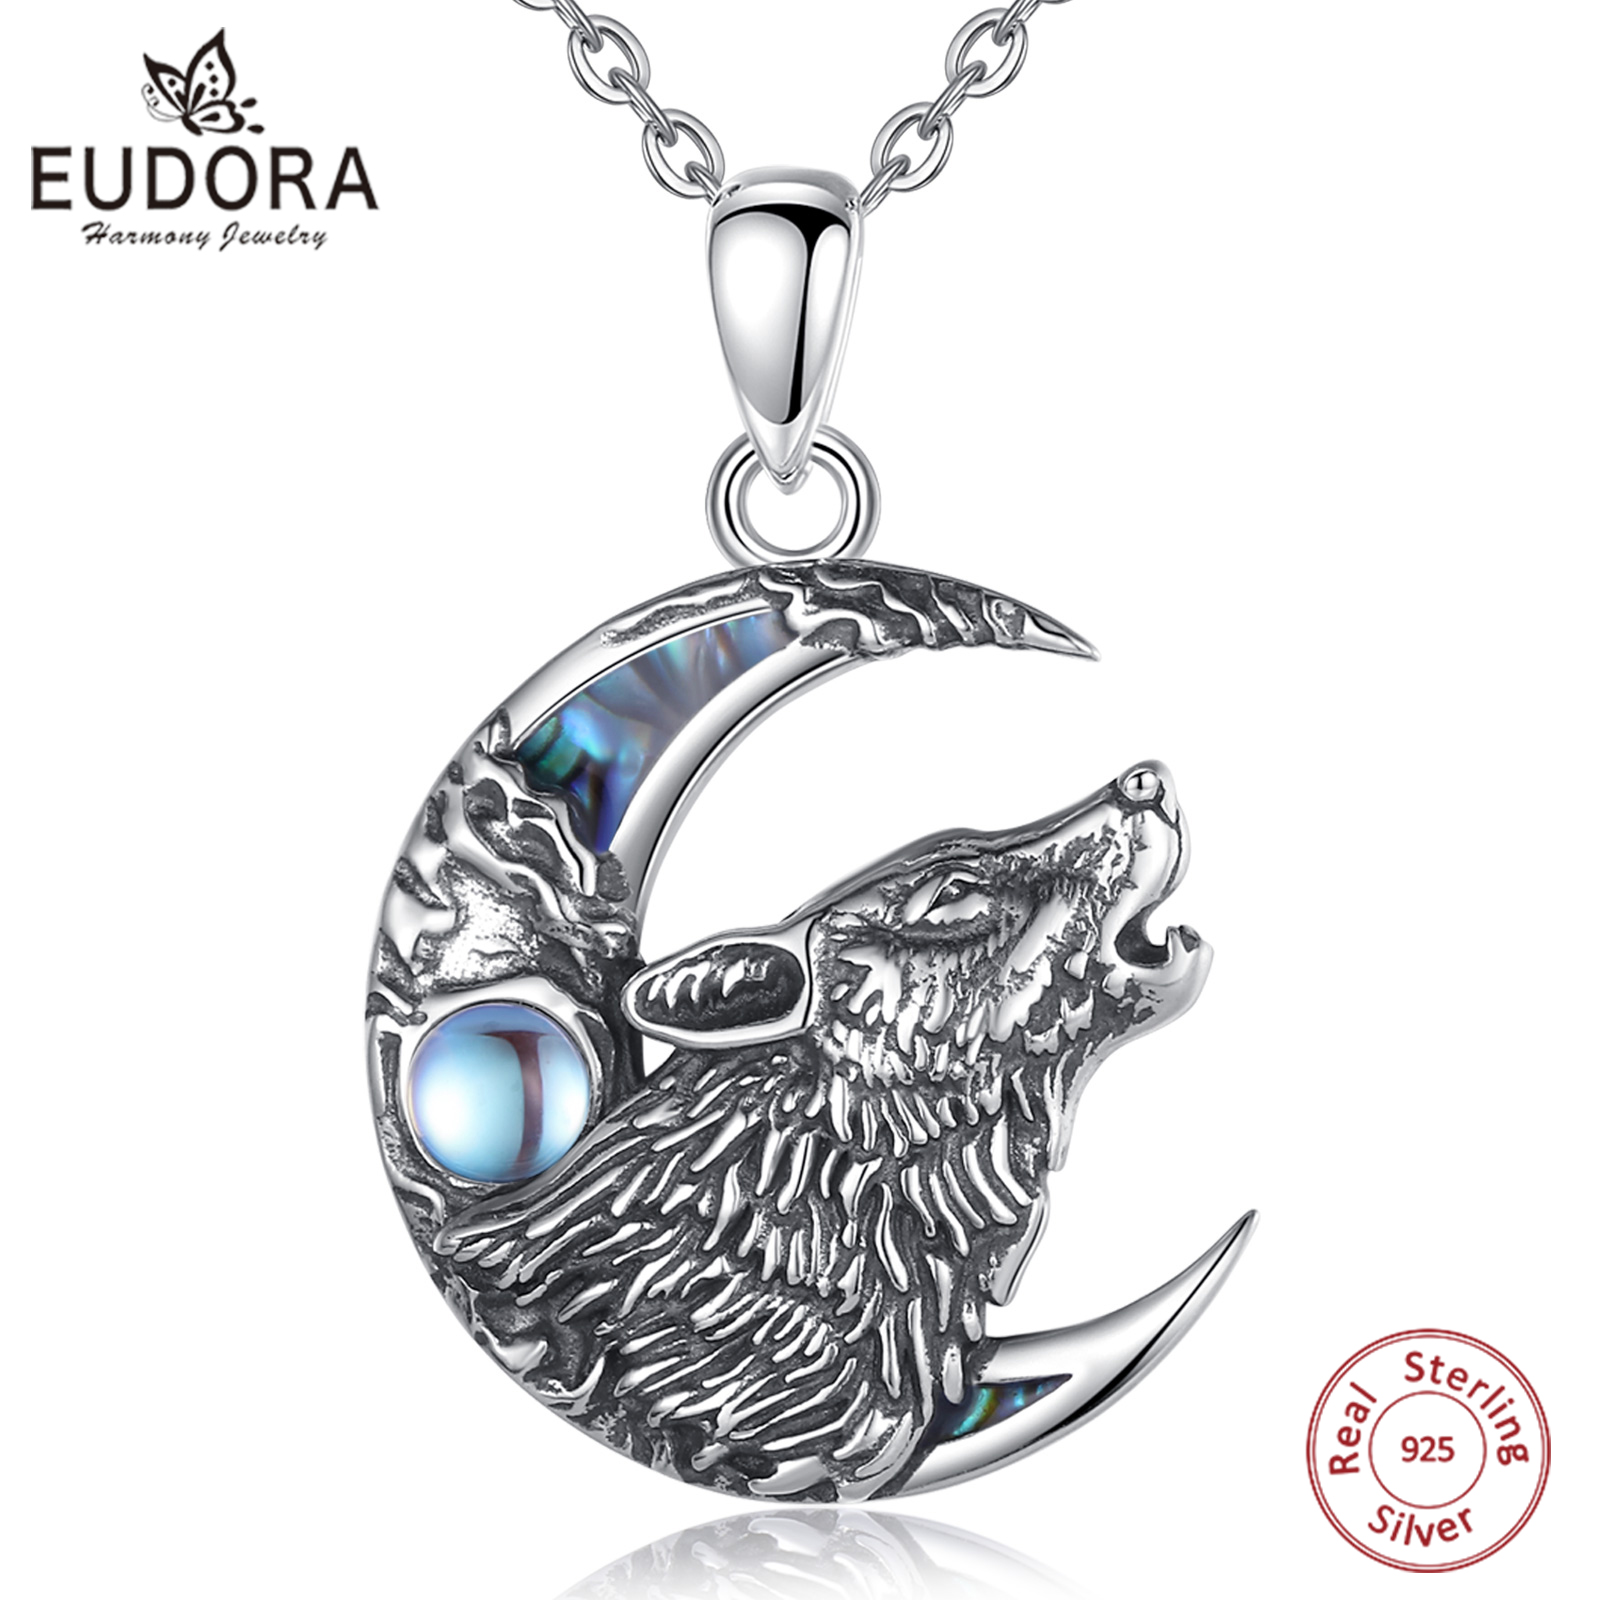 Eudora handmade 925 Sterling Silver Wolf on the Moon Necklace Moonstone Wolf Pendant Animal Series Jewelry for Warriors Men’women Gift